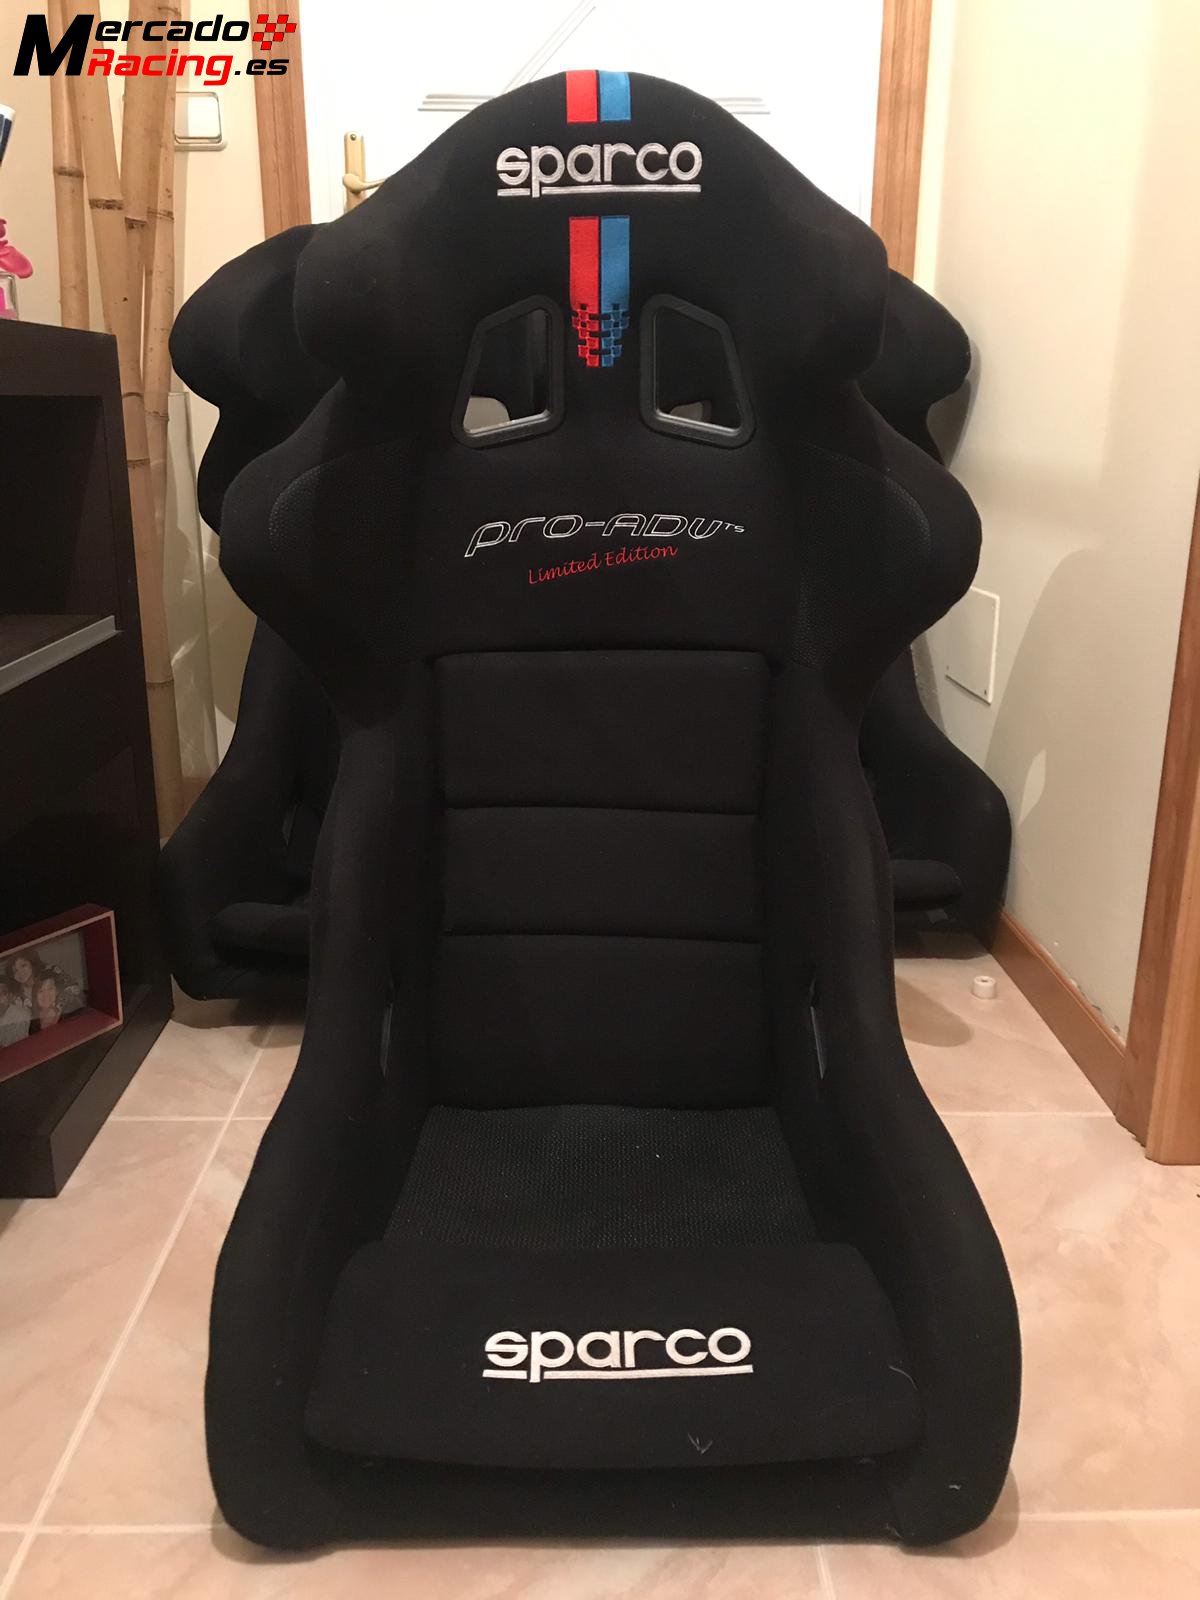 Sparco pro-adv limited edition